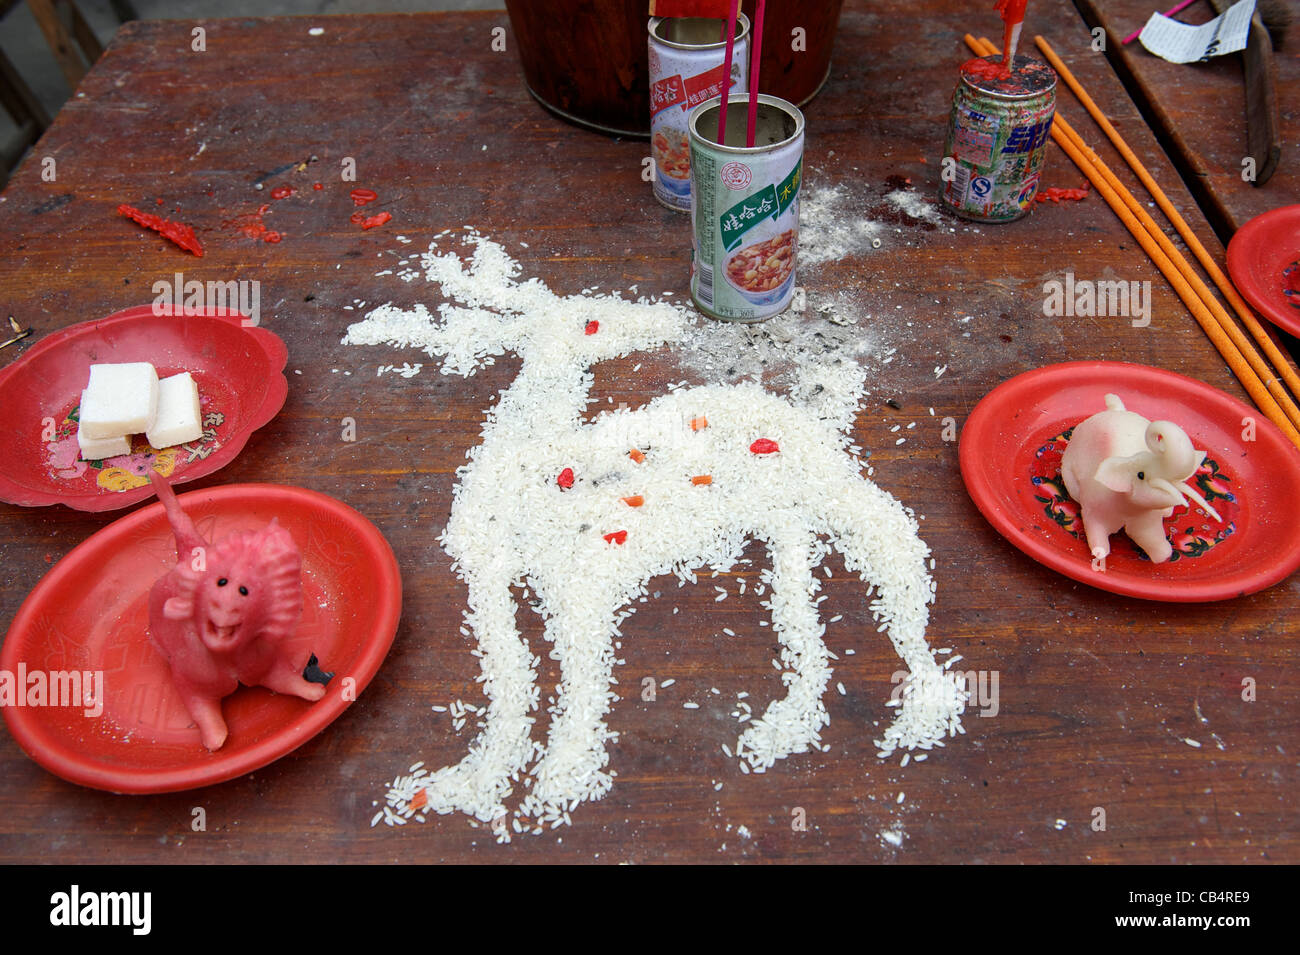 Deer -  a symbolic animal of longevity- made with rice at a Taoist temple during Xiayuan Festival in China. 2011 Stock Photo